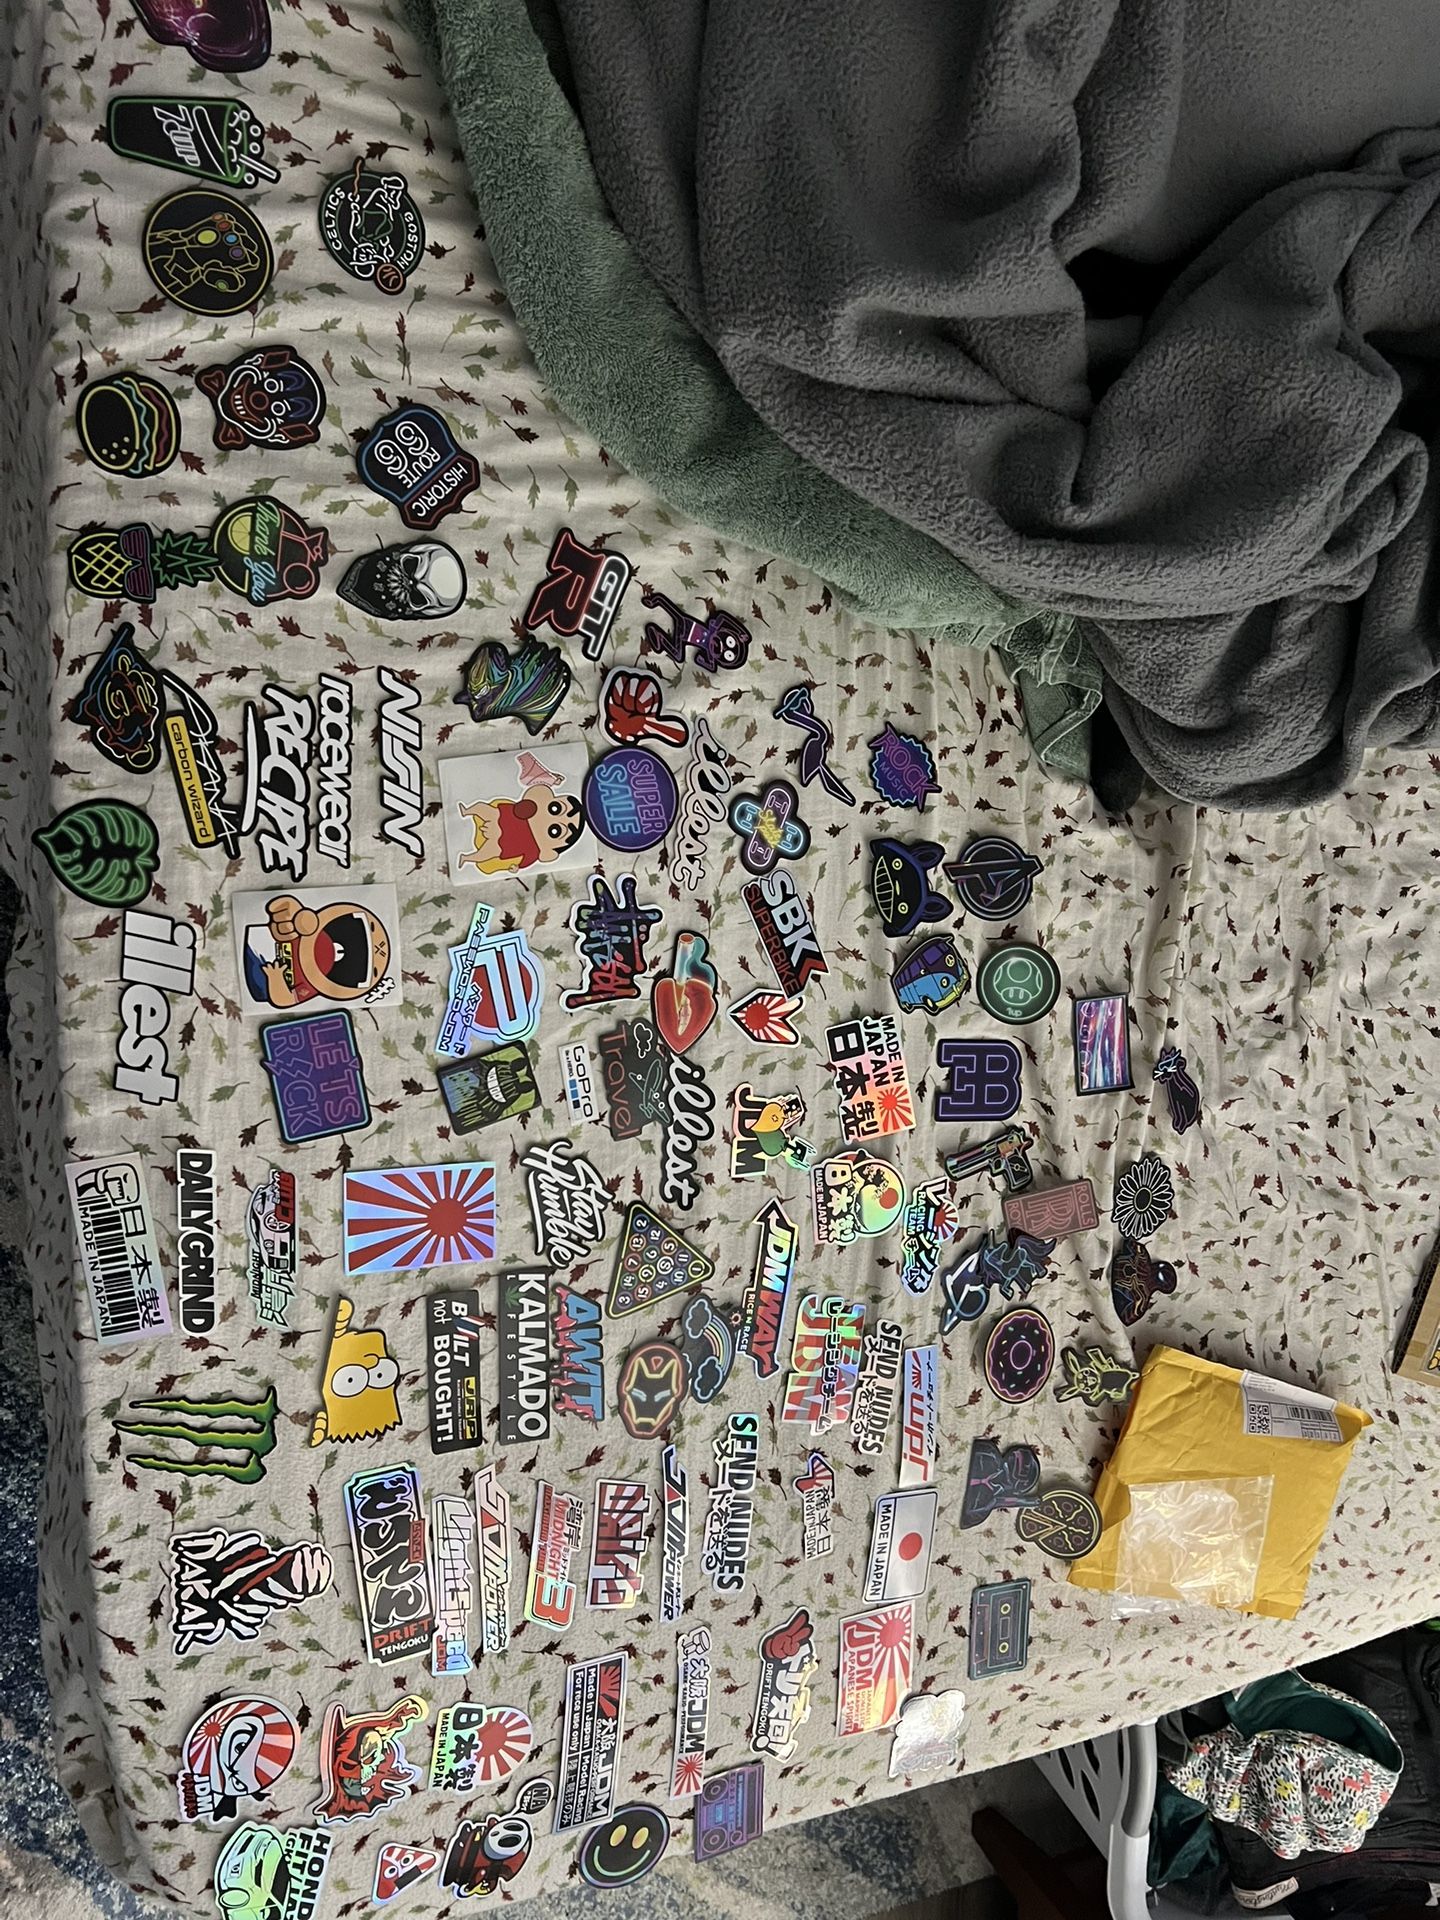 stickers $3 each 